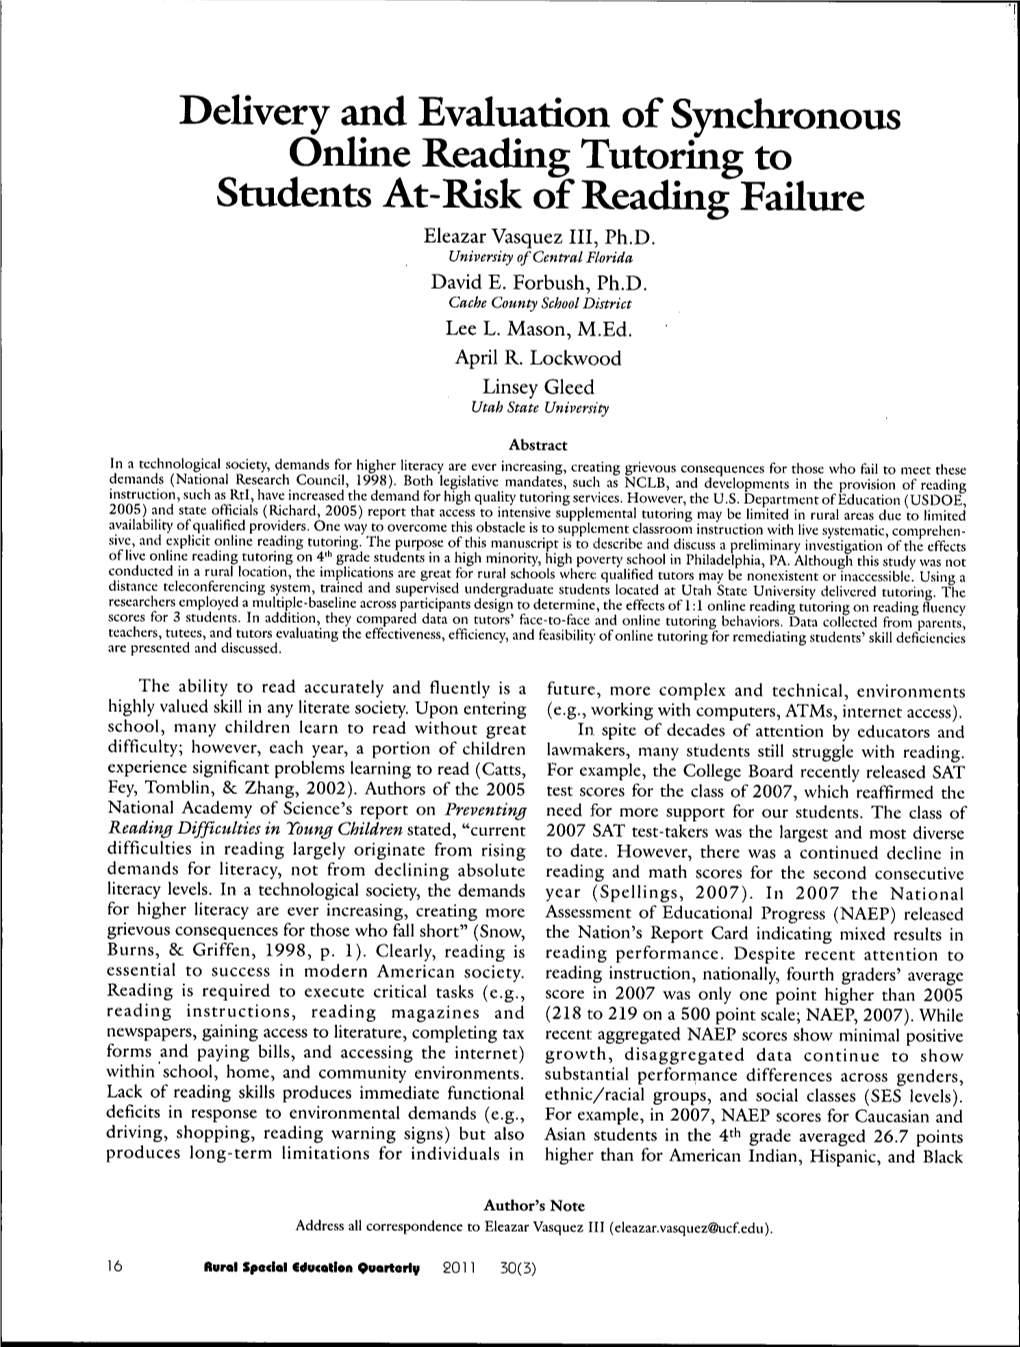 Delivery and Evaluation of Synchronous Online Reading Tutoring to Students At-Risk of Reading Failure Eleazar Vasquez III, Ph.D